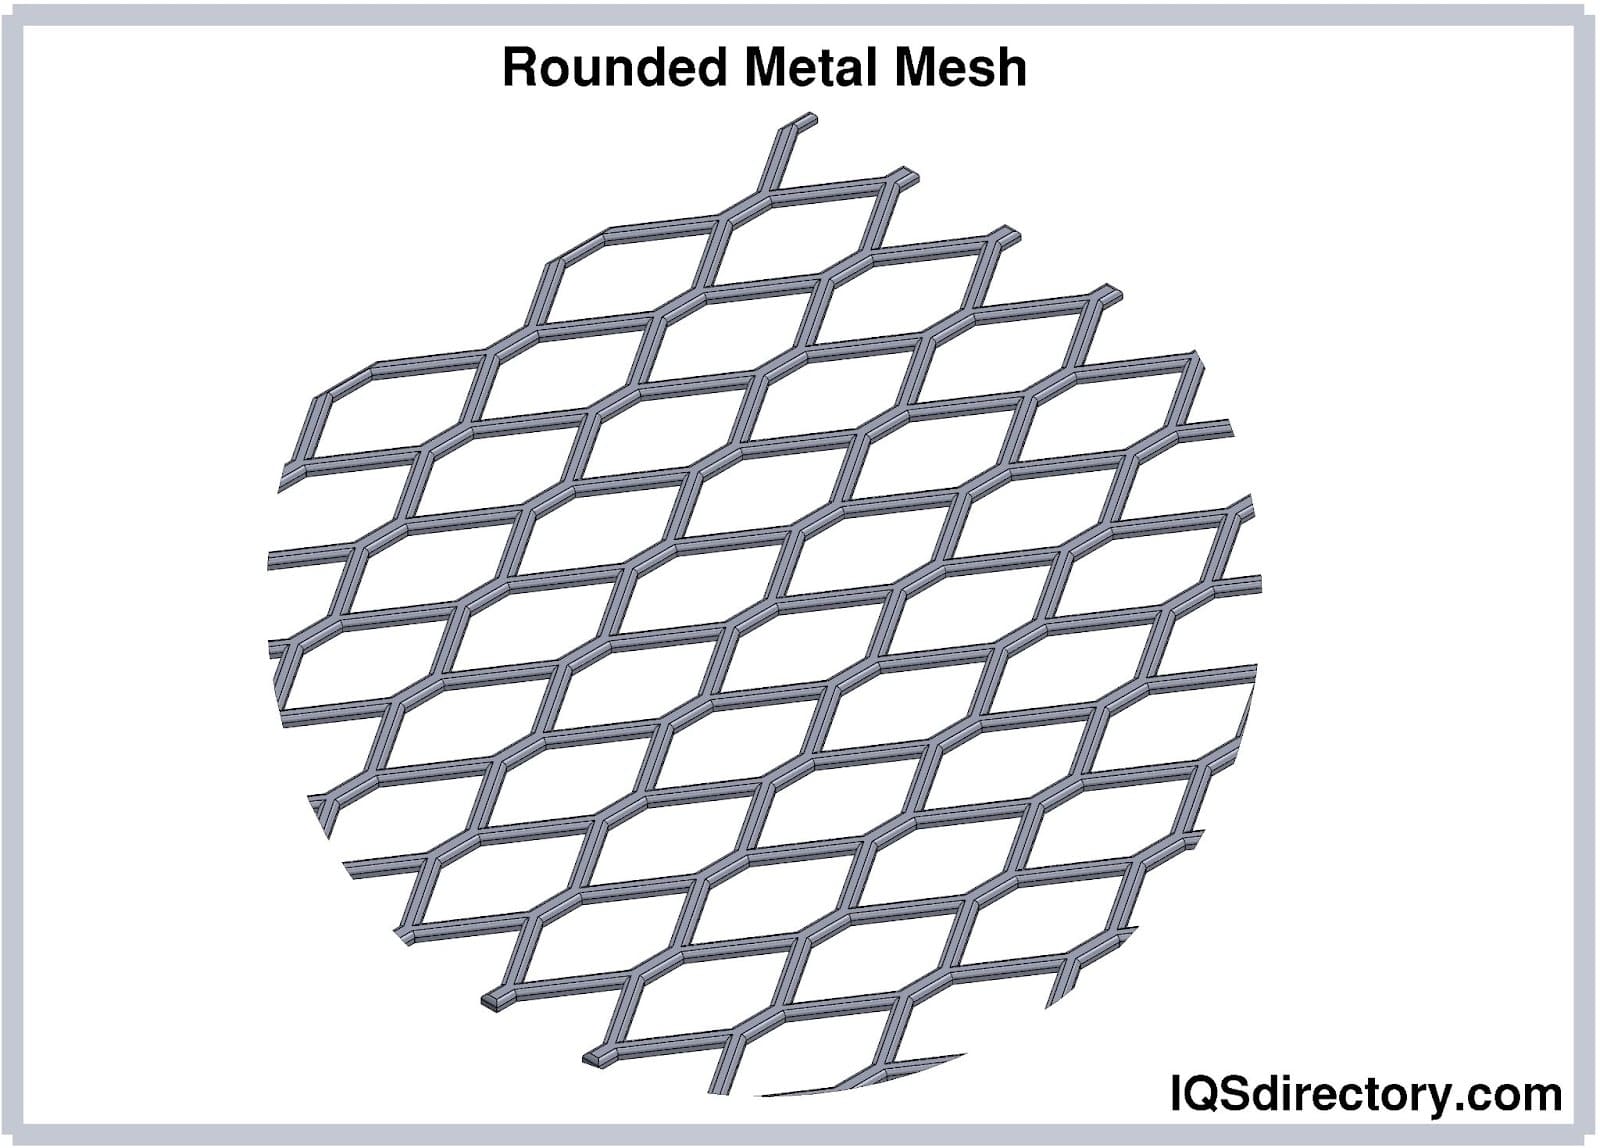 Rounded Metal Mesh